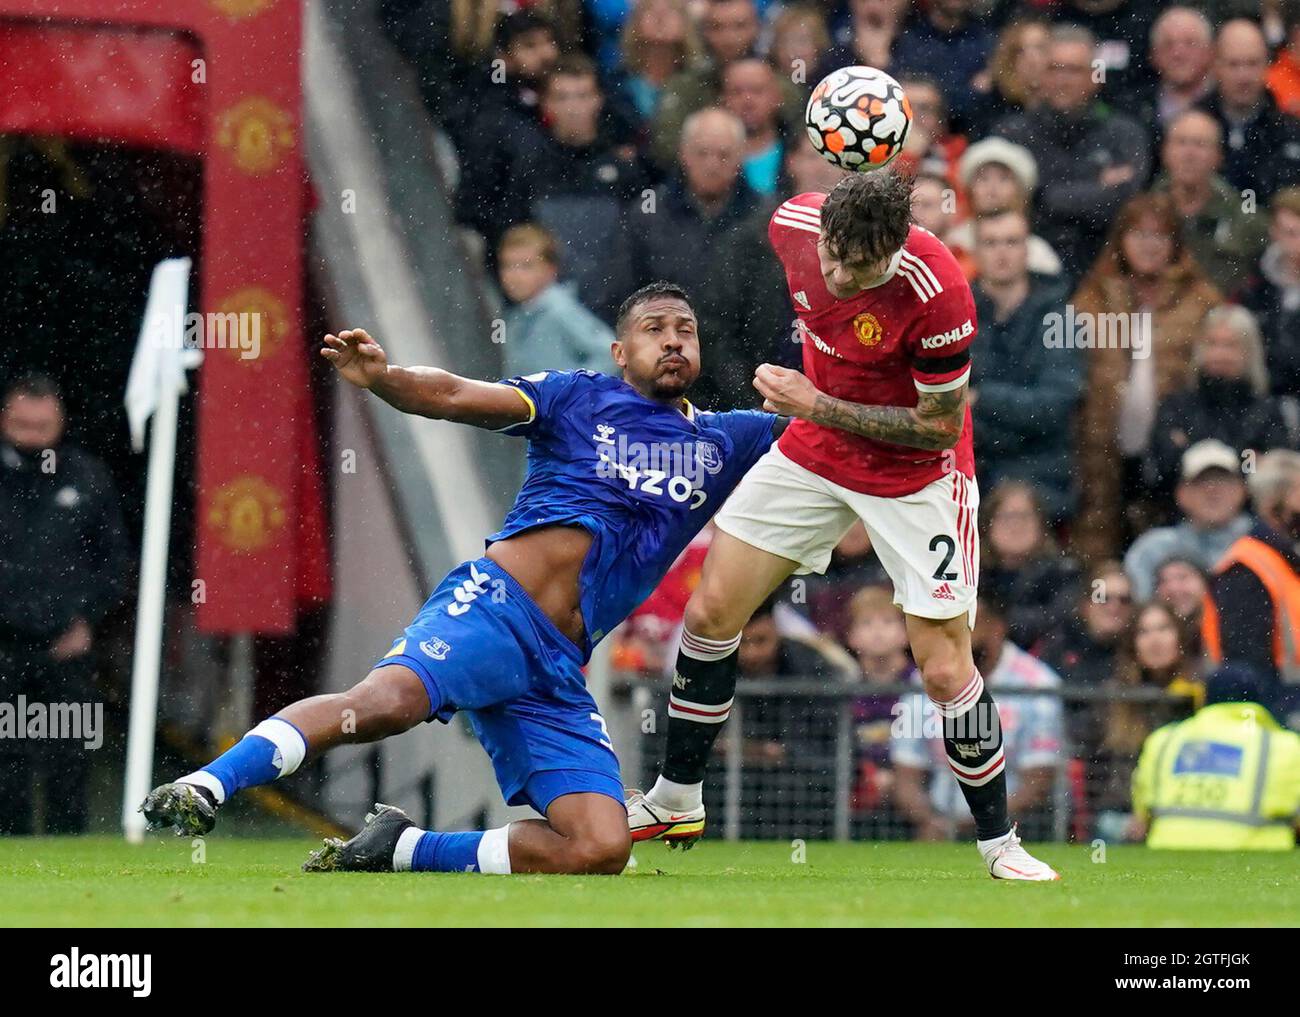 Manchester, UK. 2nd October 2021. Jose Salomon Rondon of Everton challenged  by Victor Lindelof of Manchester United during the Premier League match at  Old Trafford, Manchester. Picture credit should read: Andrew Yates /